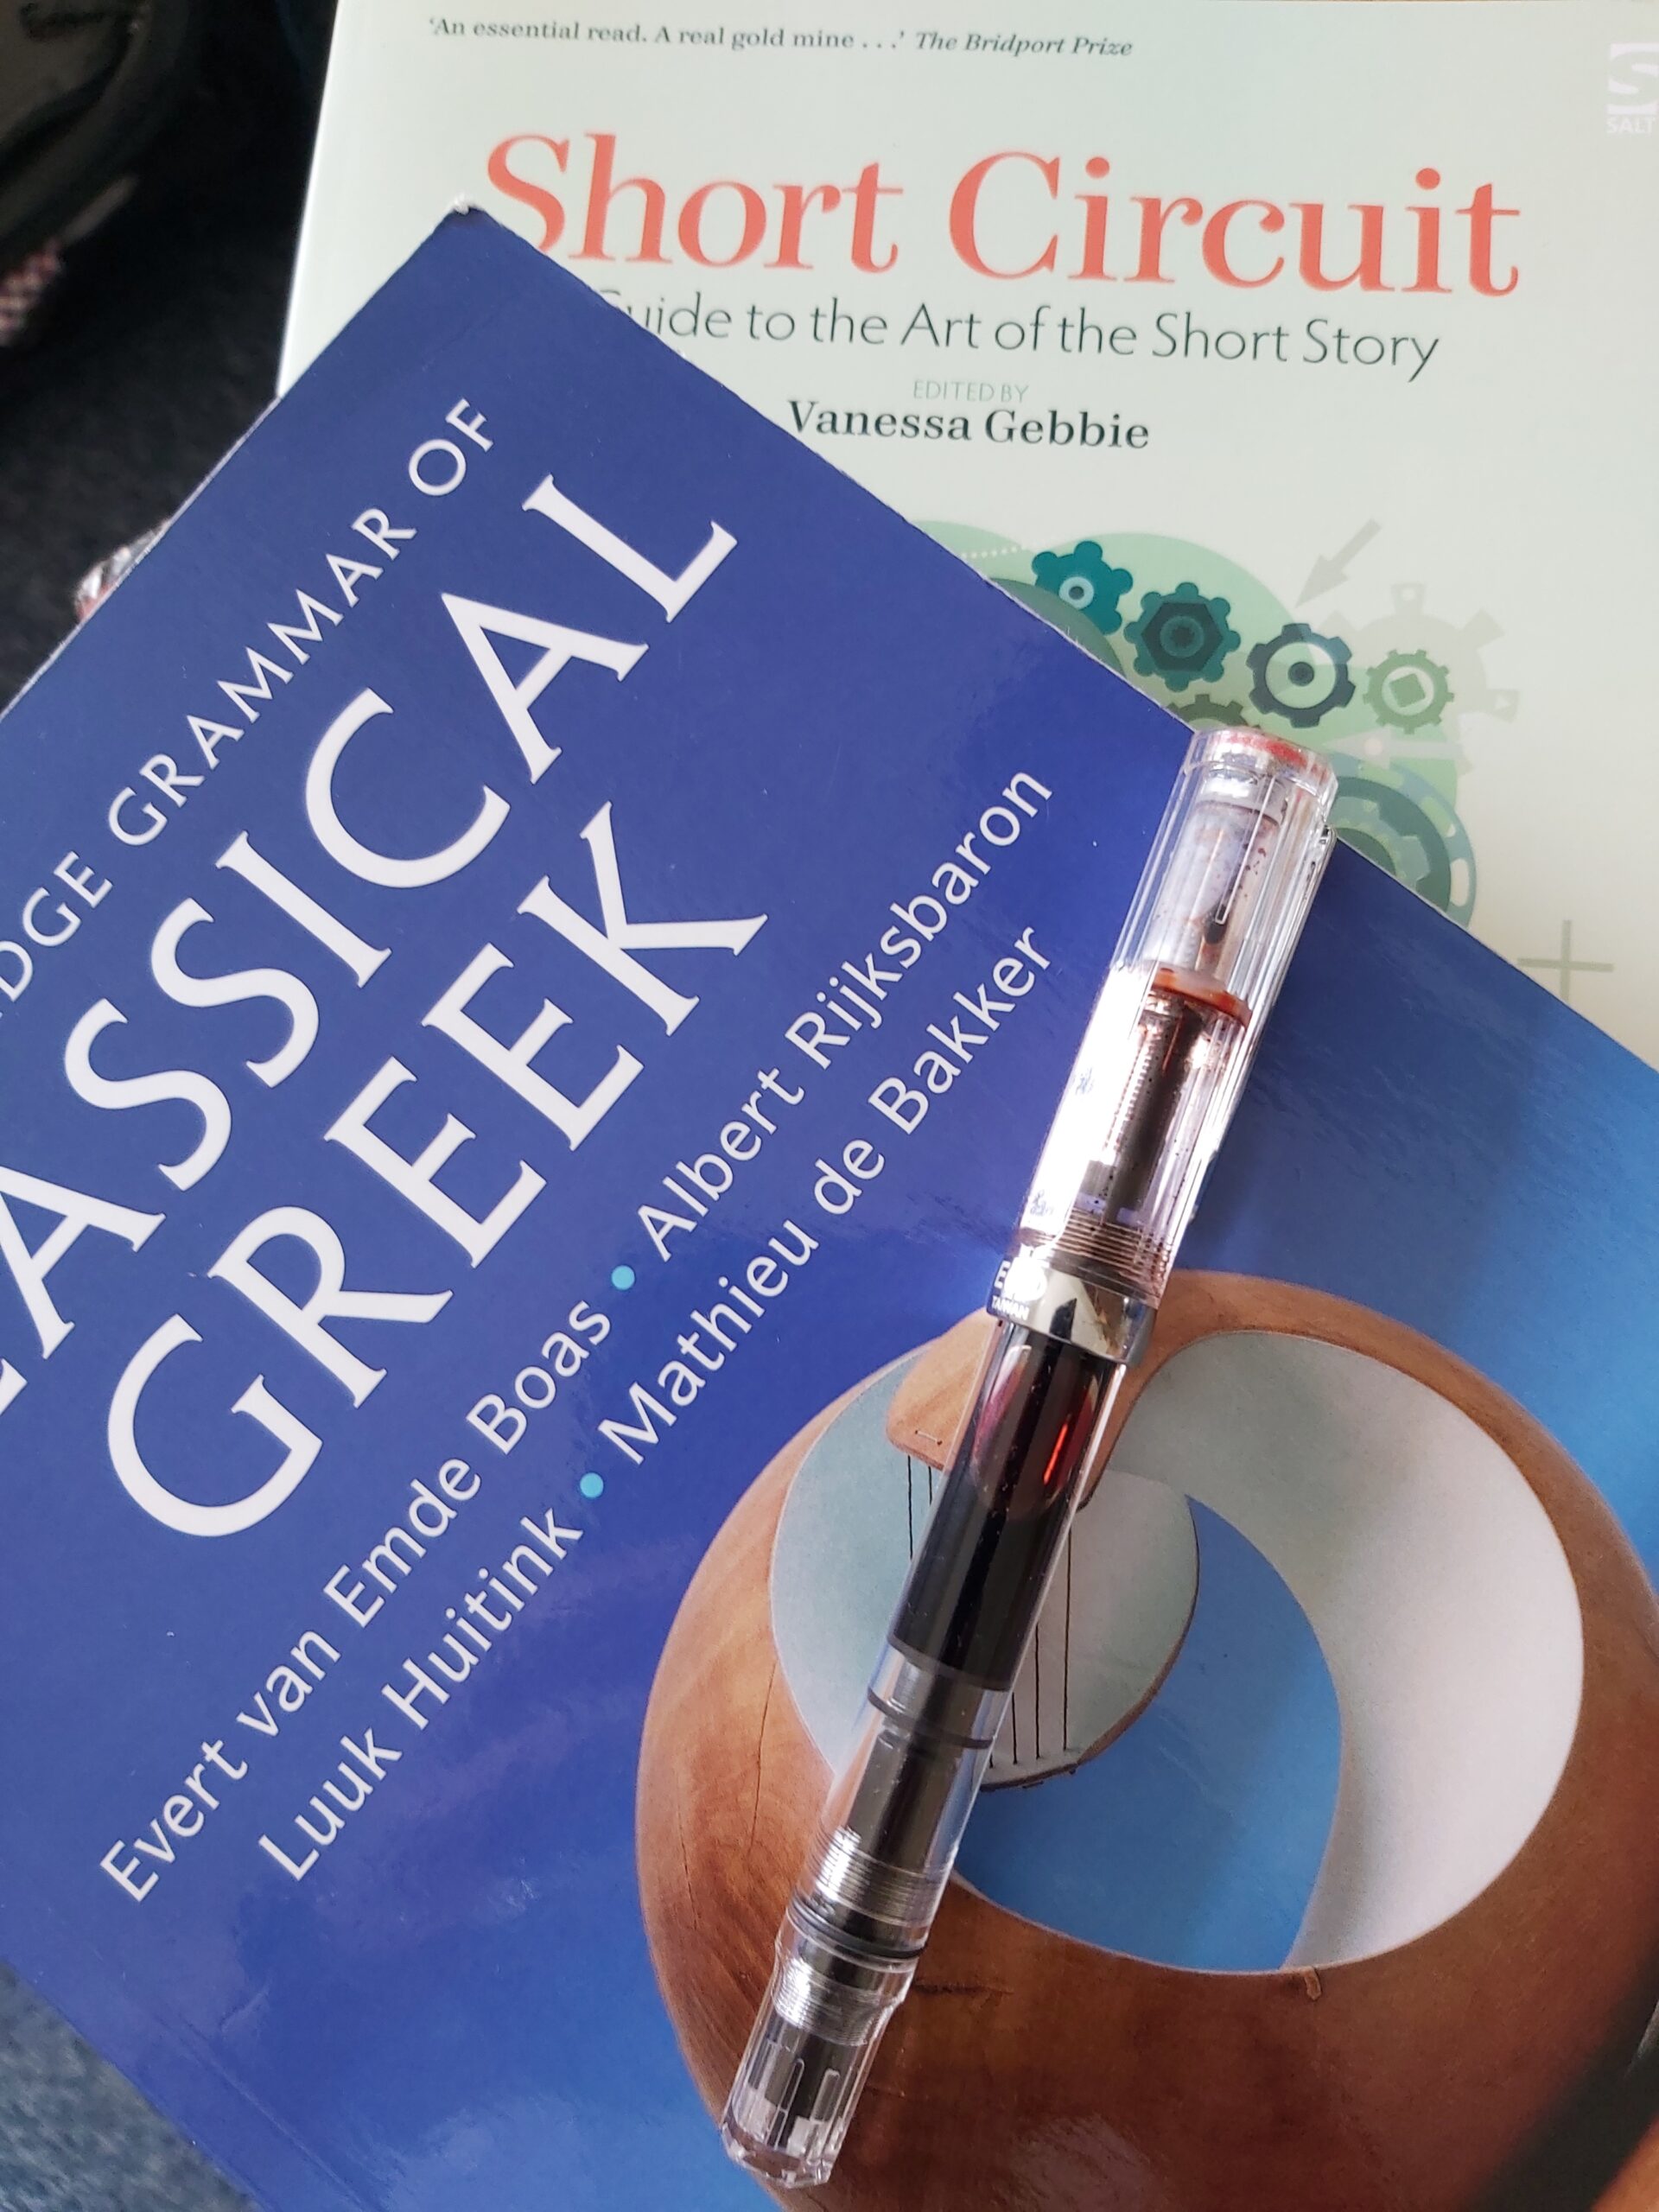 Image shows an ancient Greek grammar and a guide to short story writing with a fountain pen on top